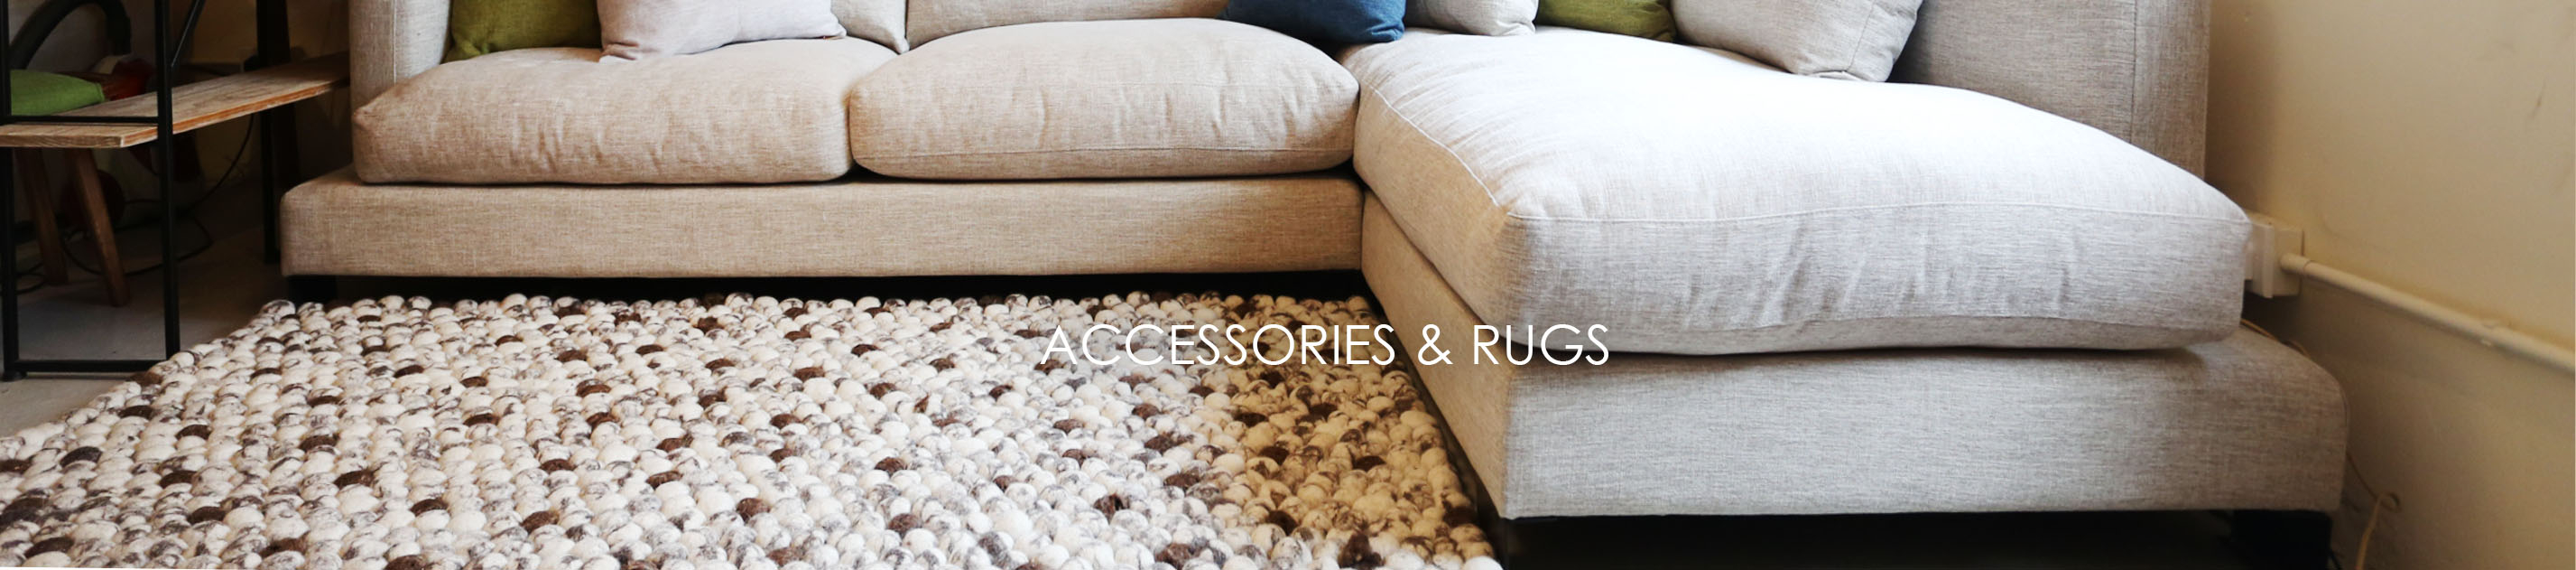 Accessories & Rugs